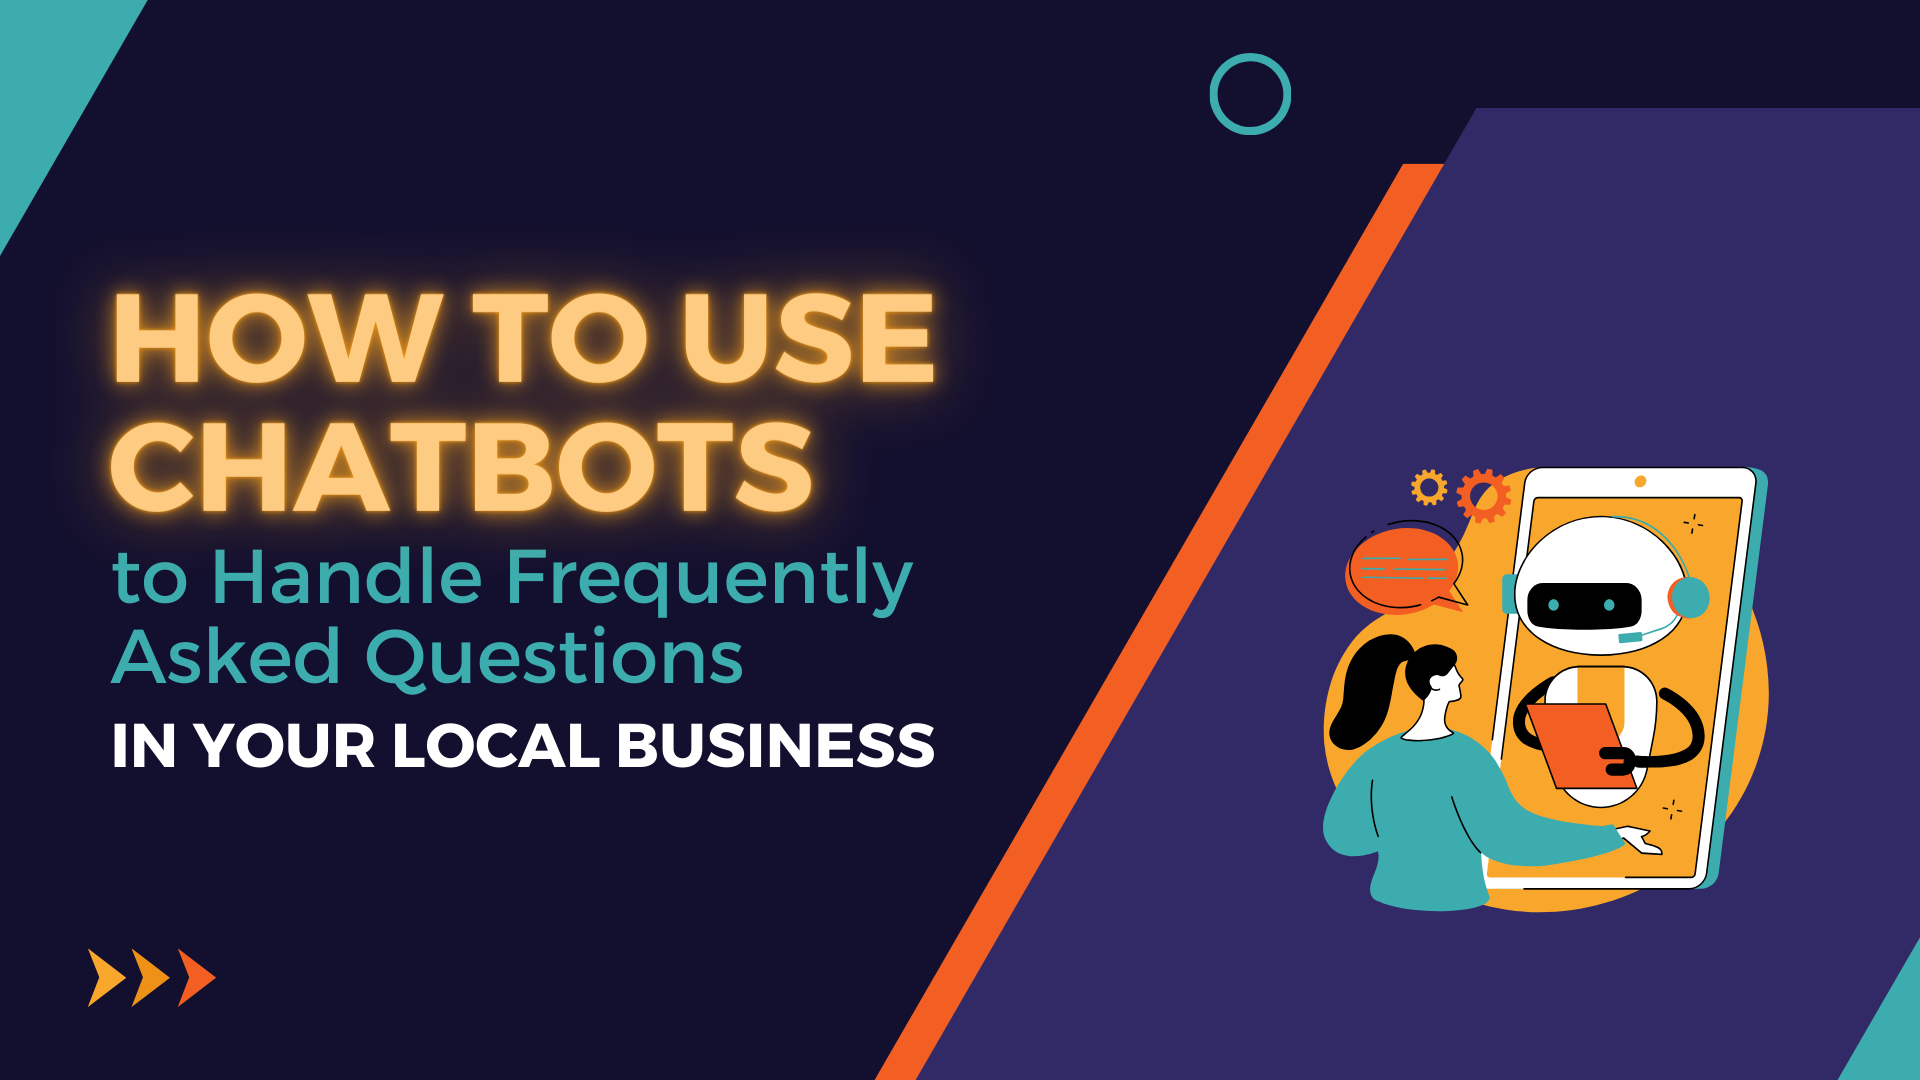 How to Use Chatbots to Handle Frequently Asked Questions in Your Local Business